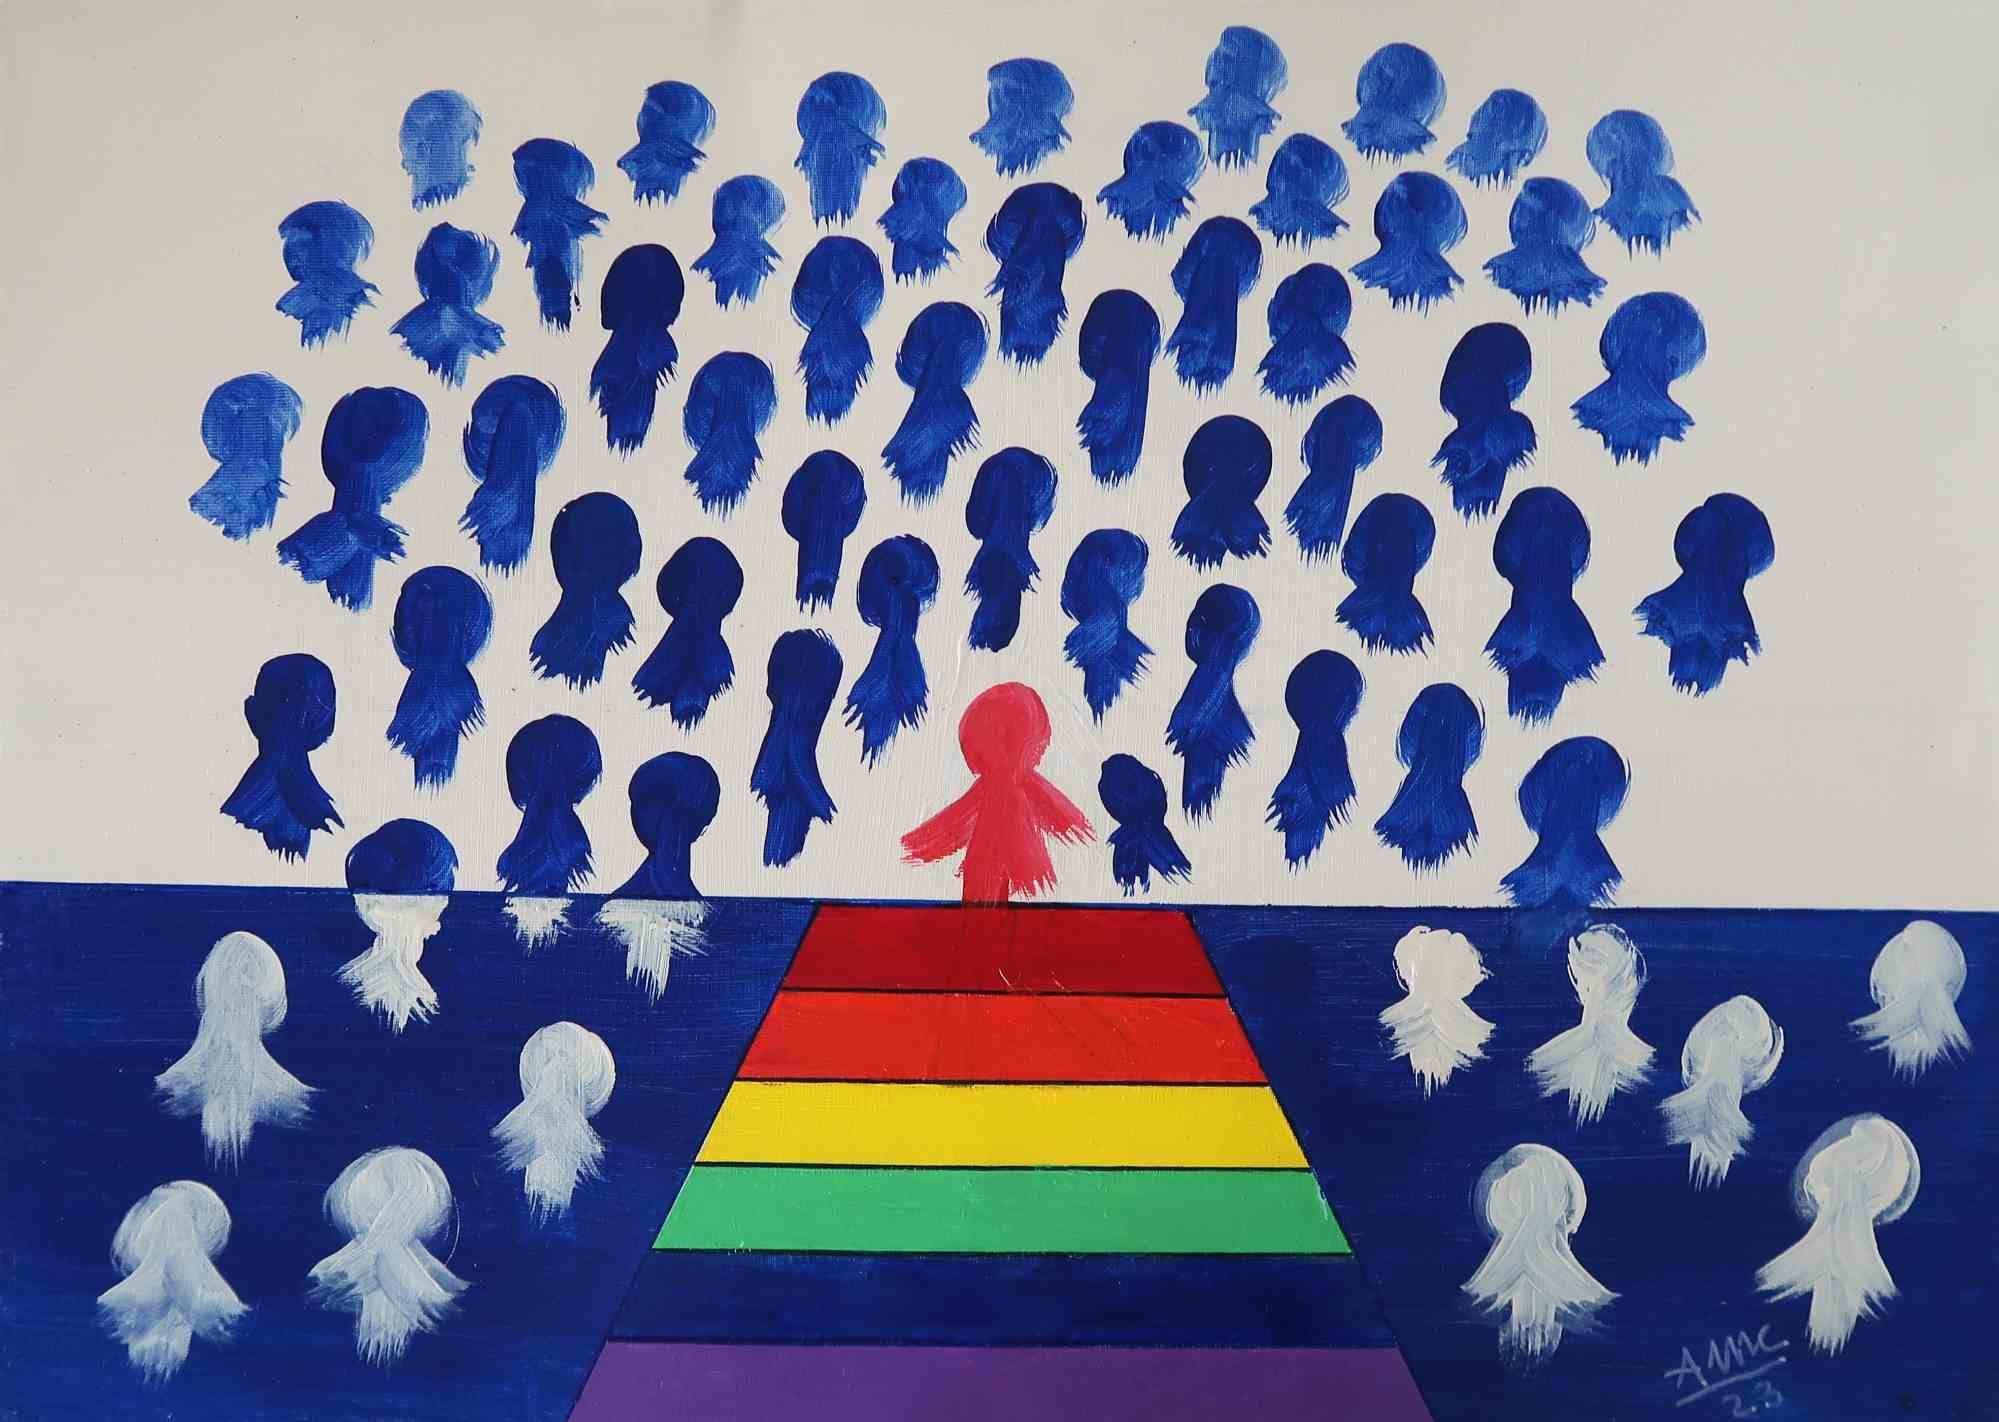 Towards Salvation is a fascinating painting by the Italian artist Anna Maria Caboni.

In a spaceless place beyond reality, anonymous ghosts are drawn towards the only hint of space: the colors of LGBT flag. It could provide them with a colorful